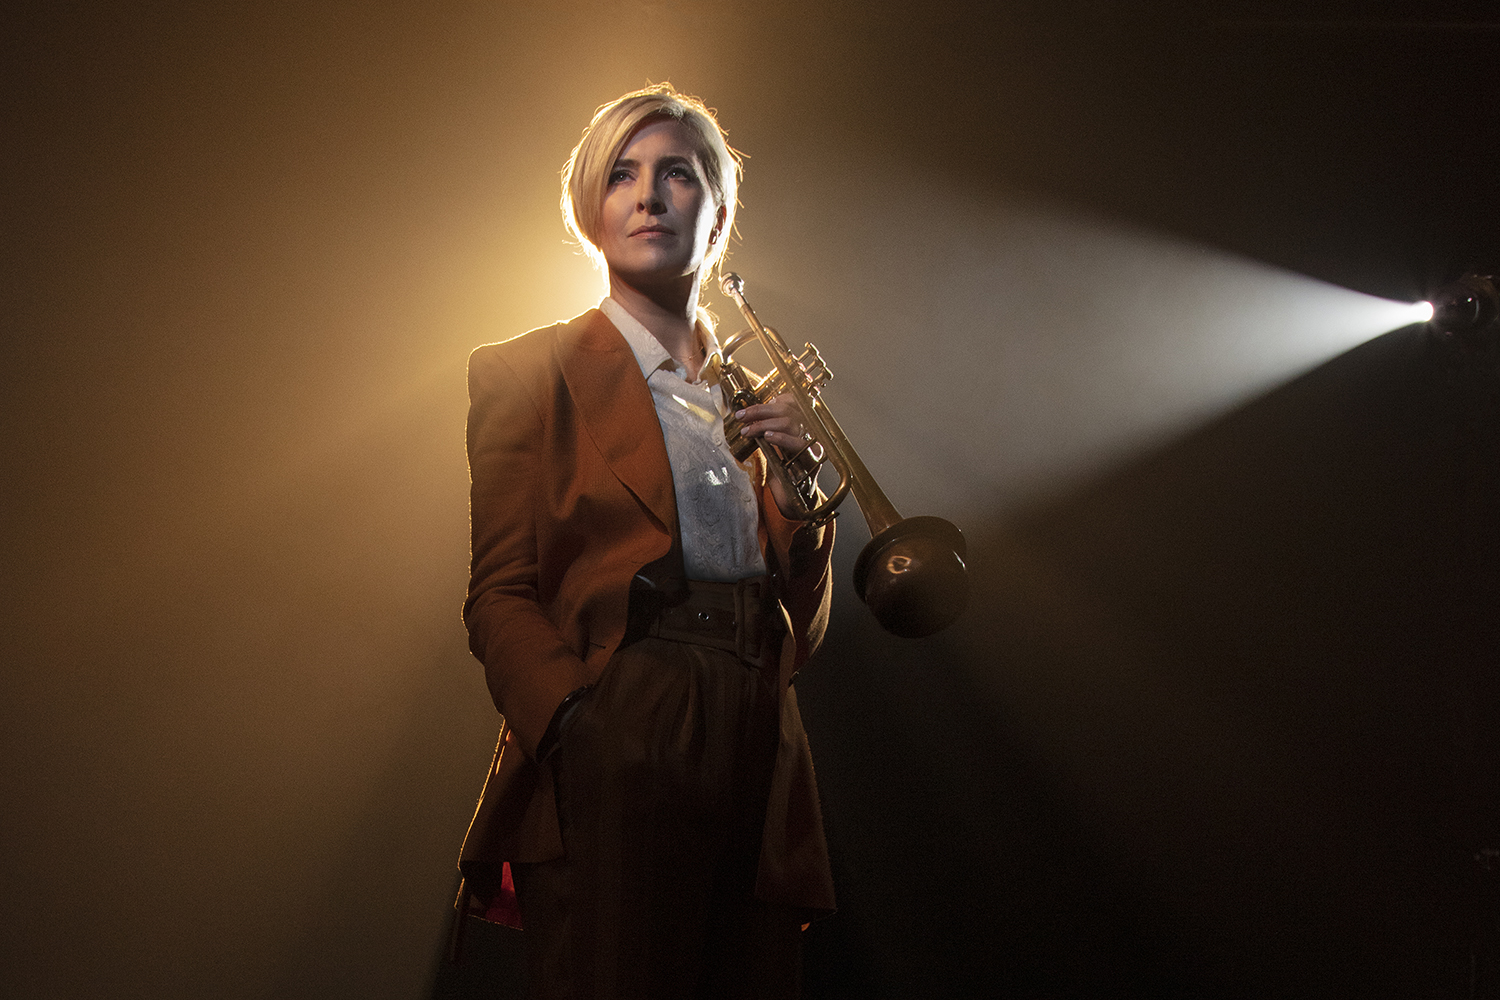 A woman wearing a suit and holding a trumpet with a spotlight on her